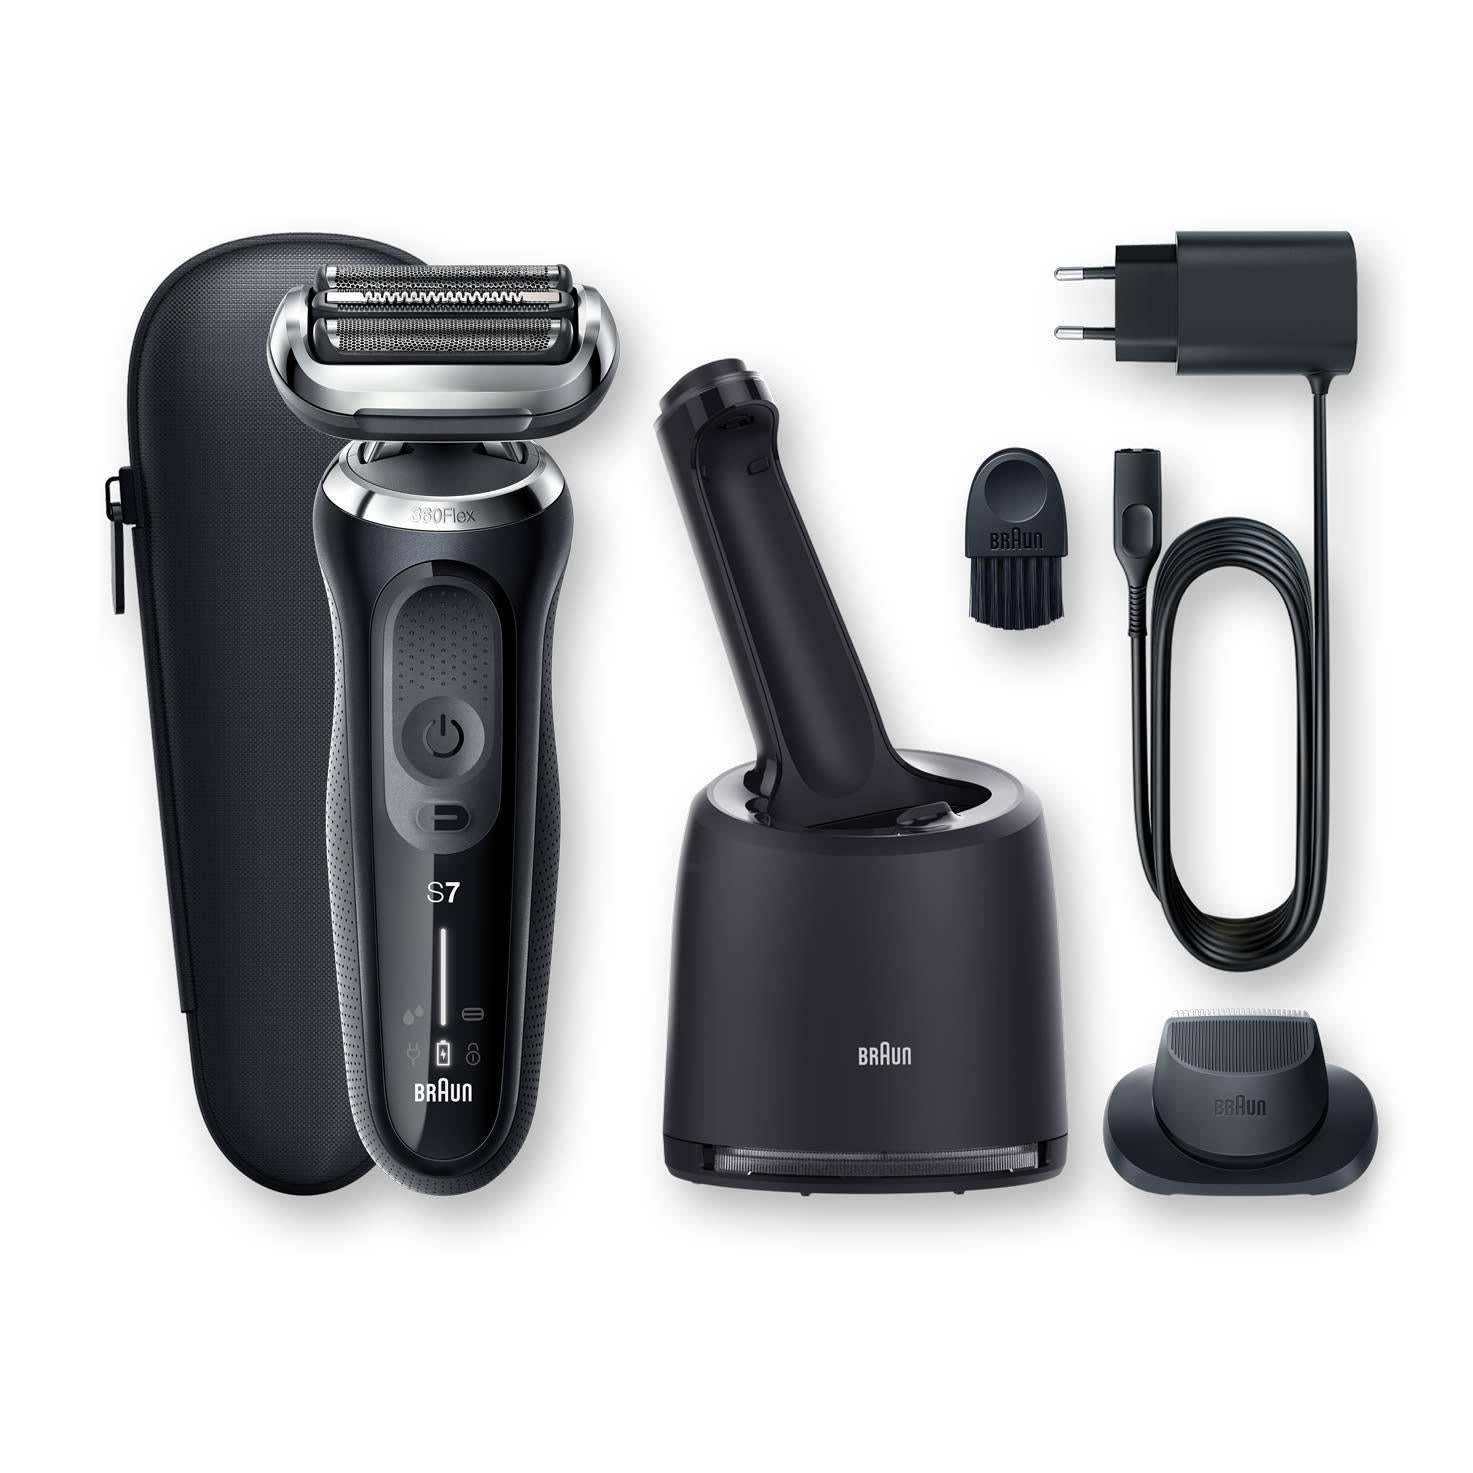 Braun Men's Series 7 70-N7200cc Wet and Dry Shaver with SmartCare Center - Black - Healthxpress.ie